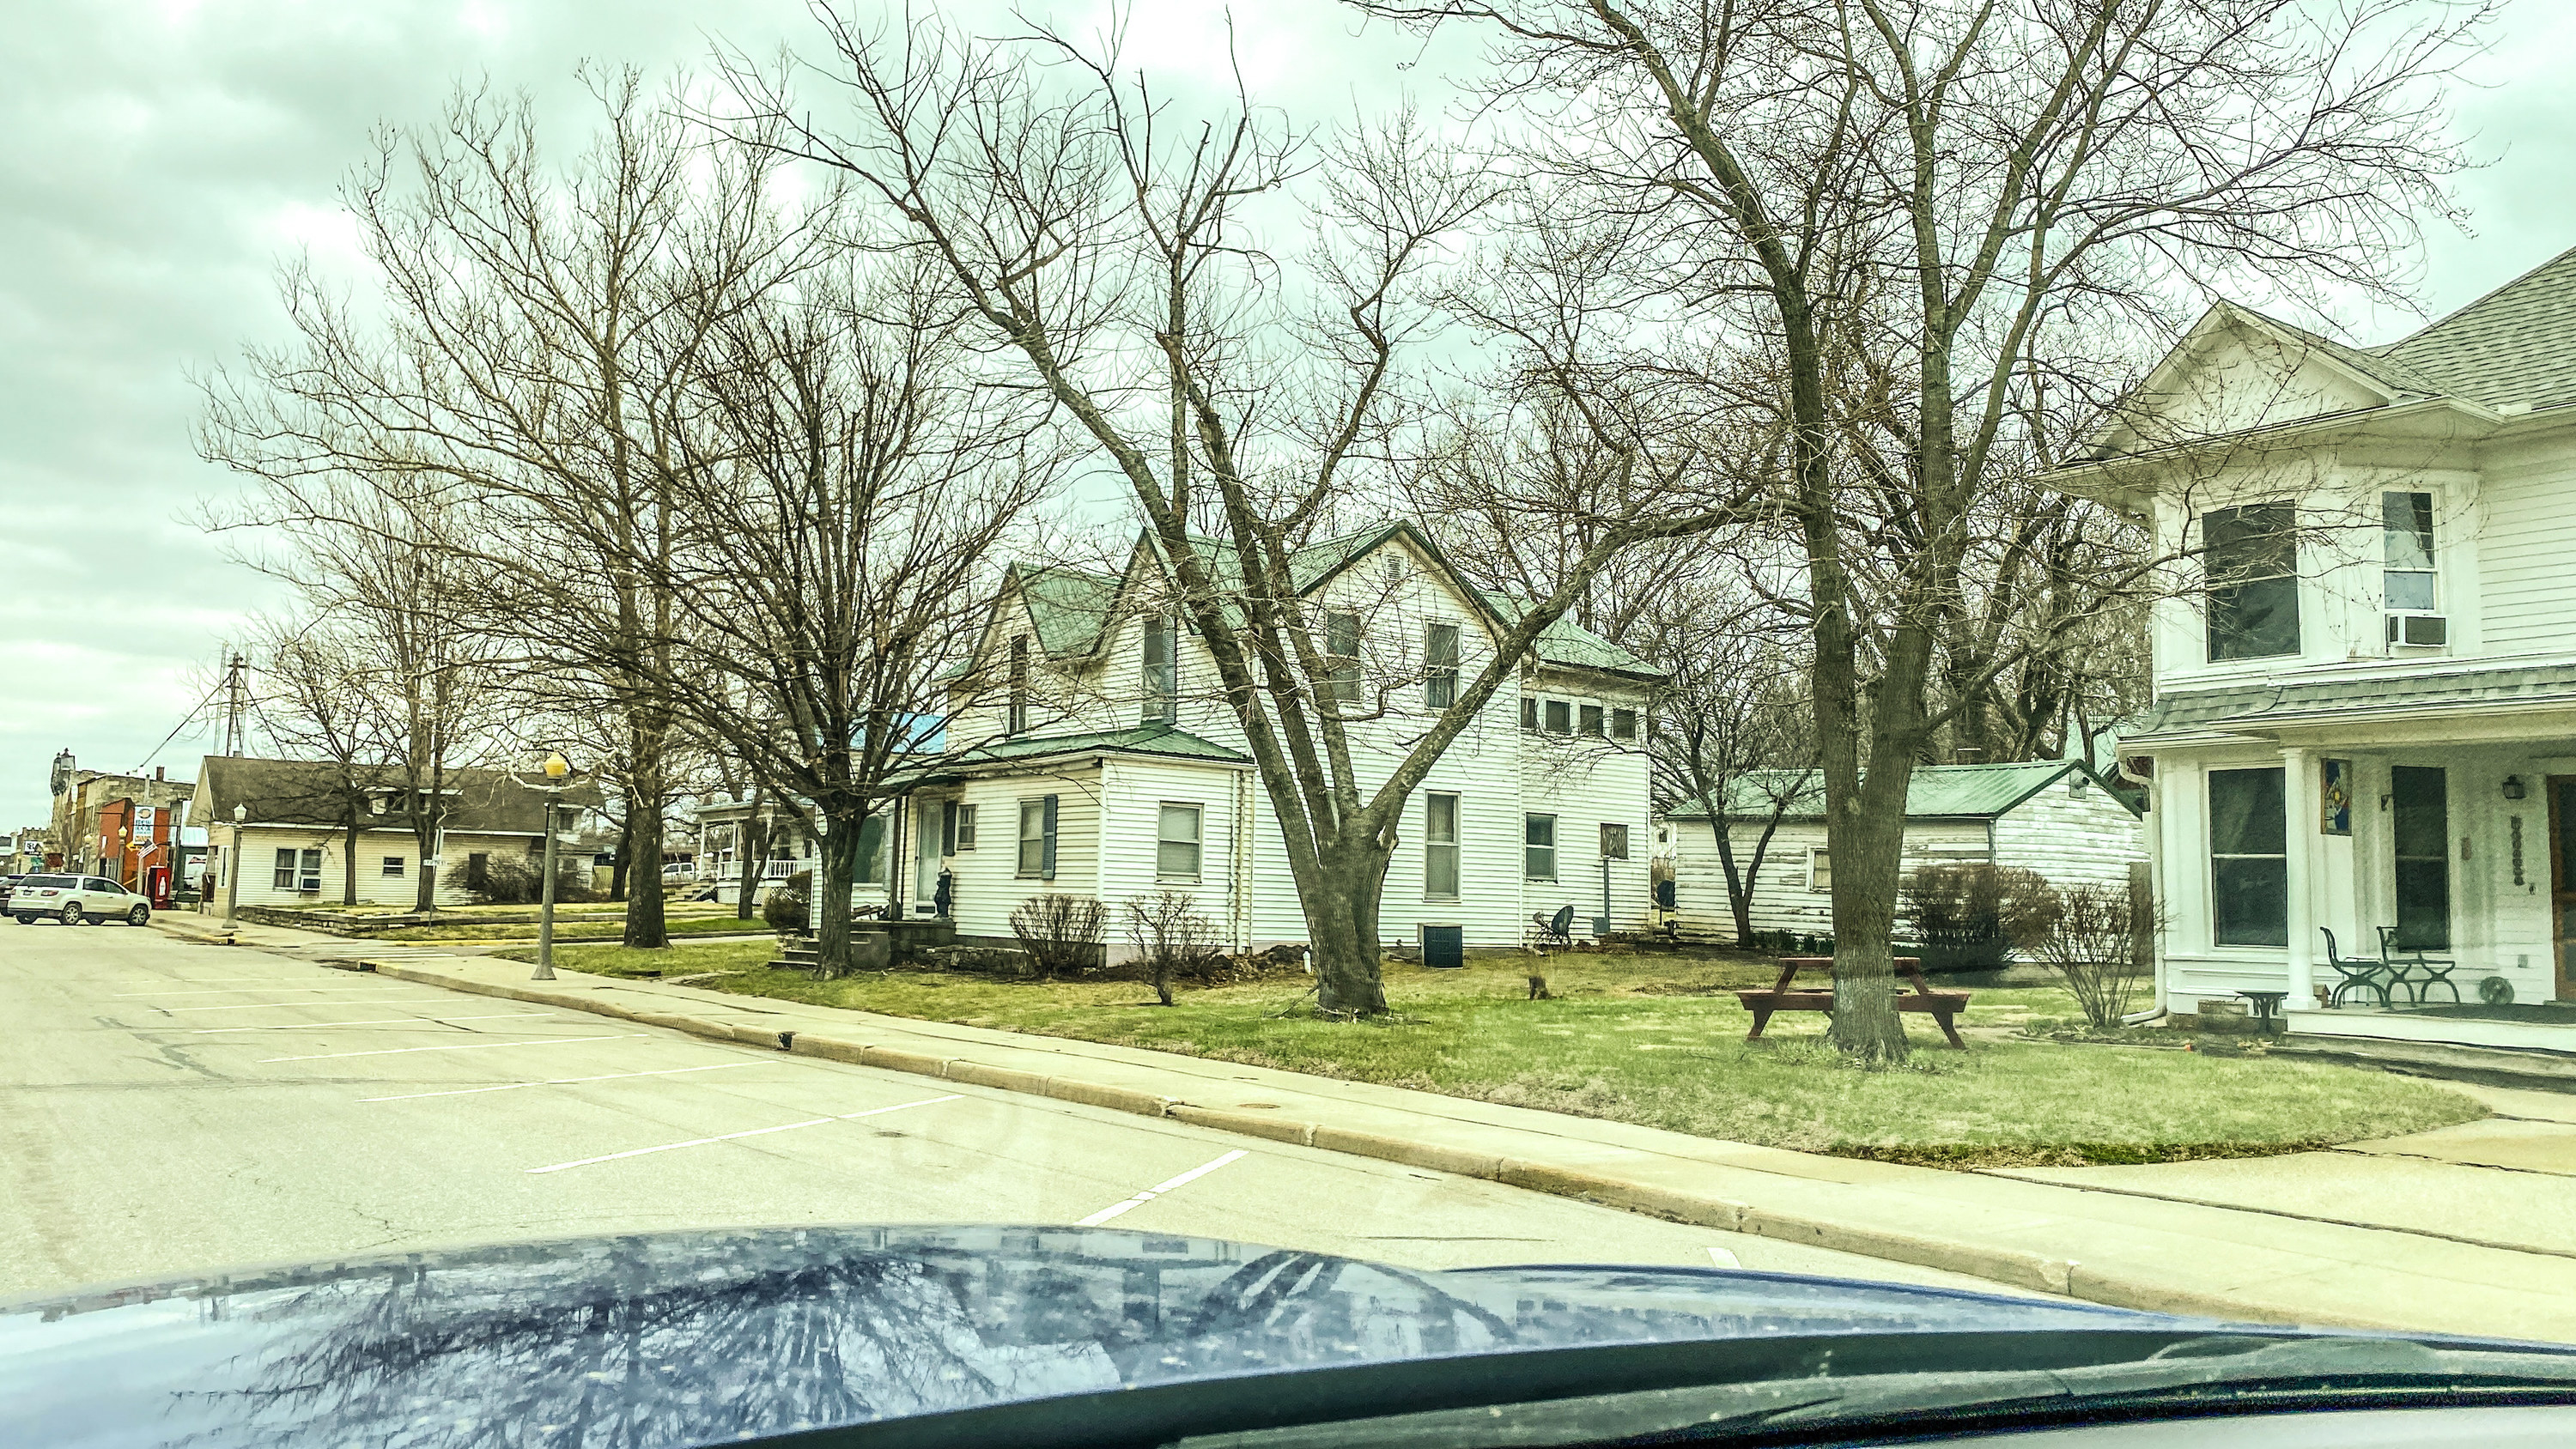 Beautiful homes can be seen from the street in Manhattan, Kansas